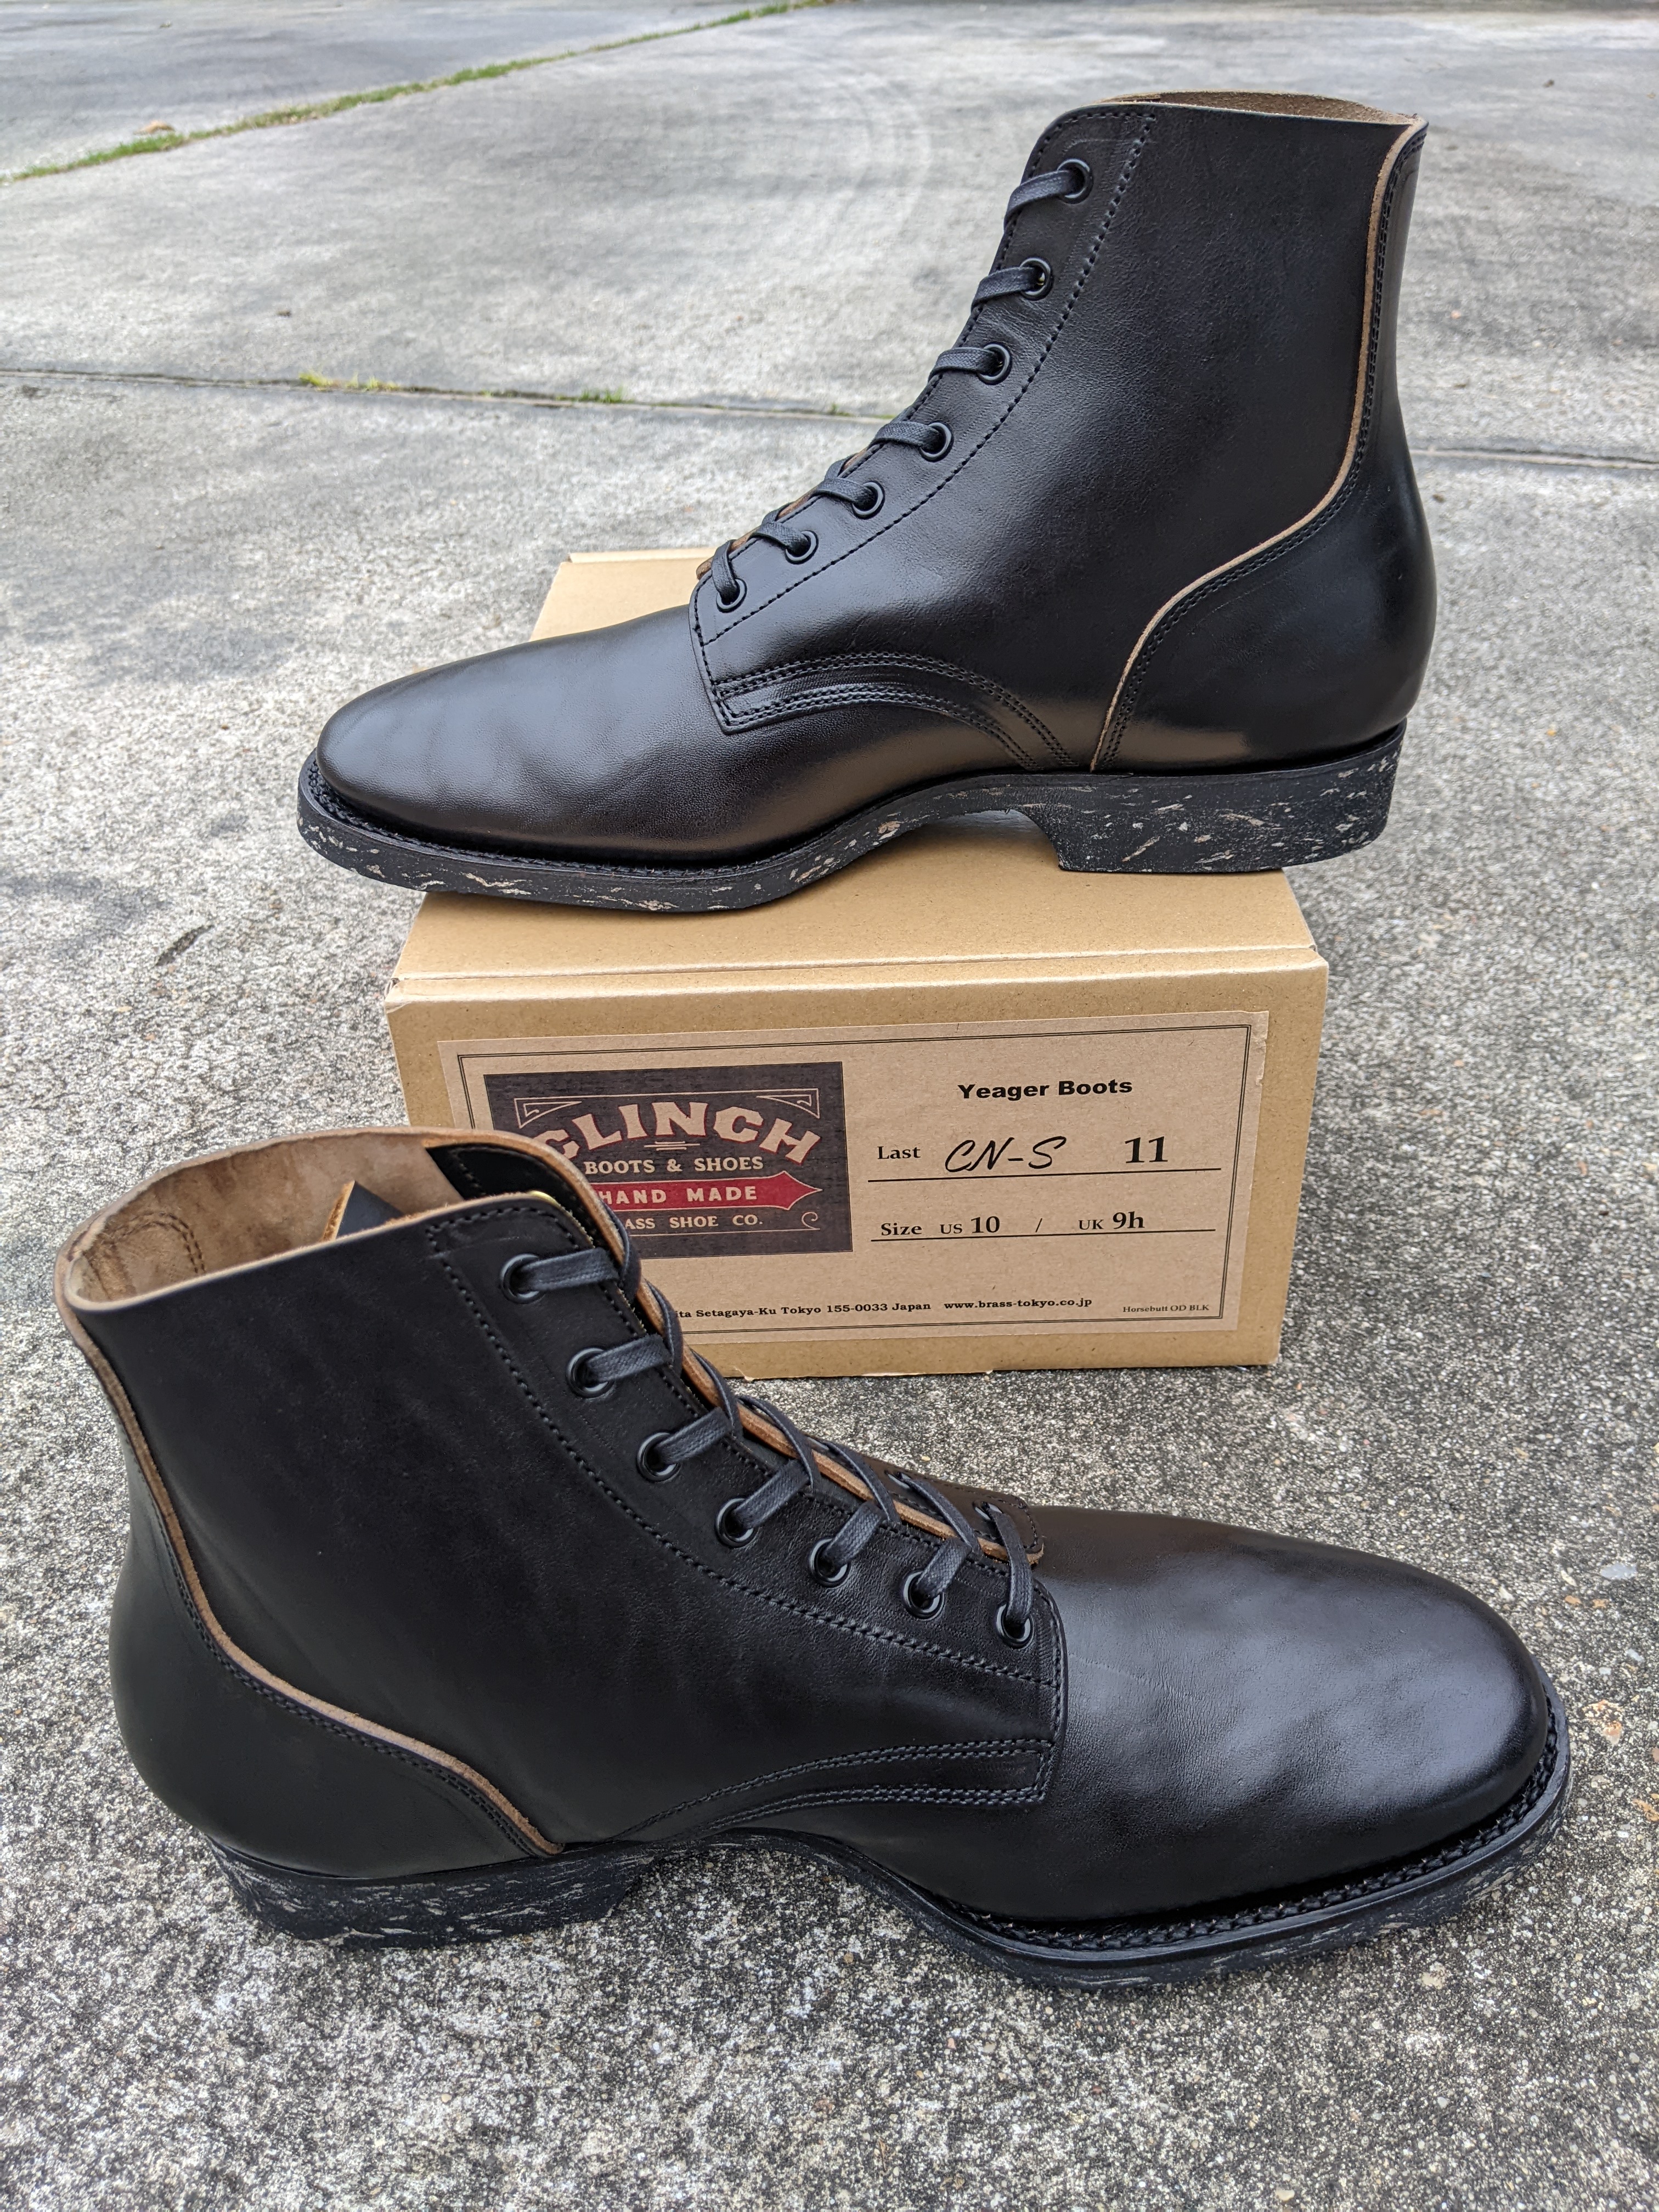 Clinch Black Overdyed Horsebutt Yeager Boots 5.jpg